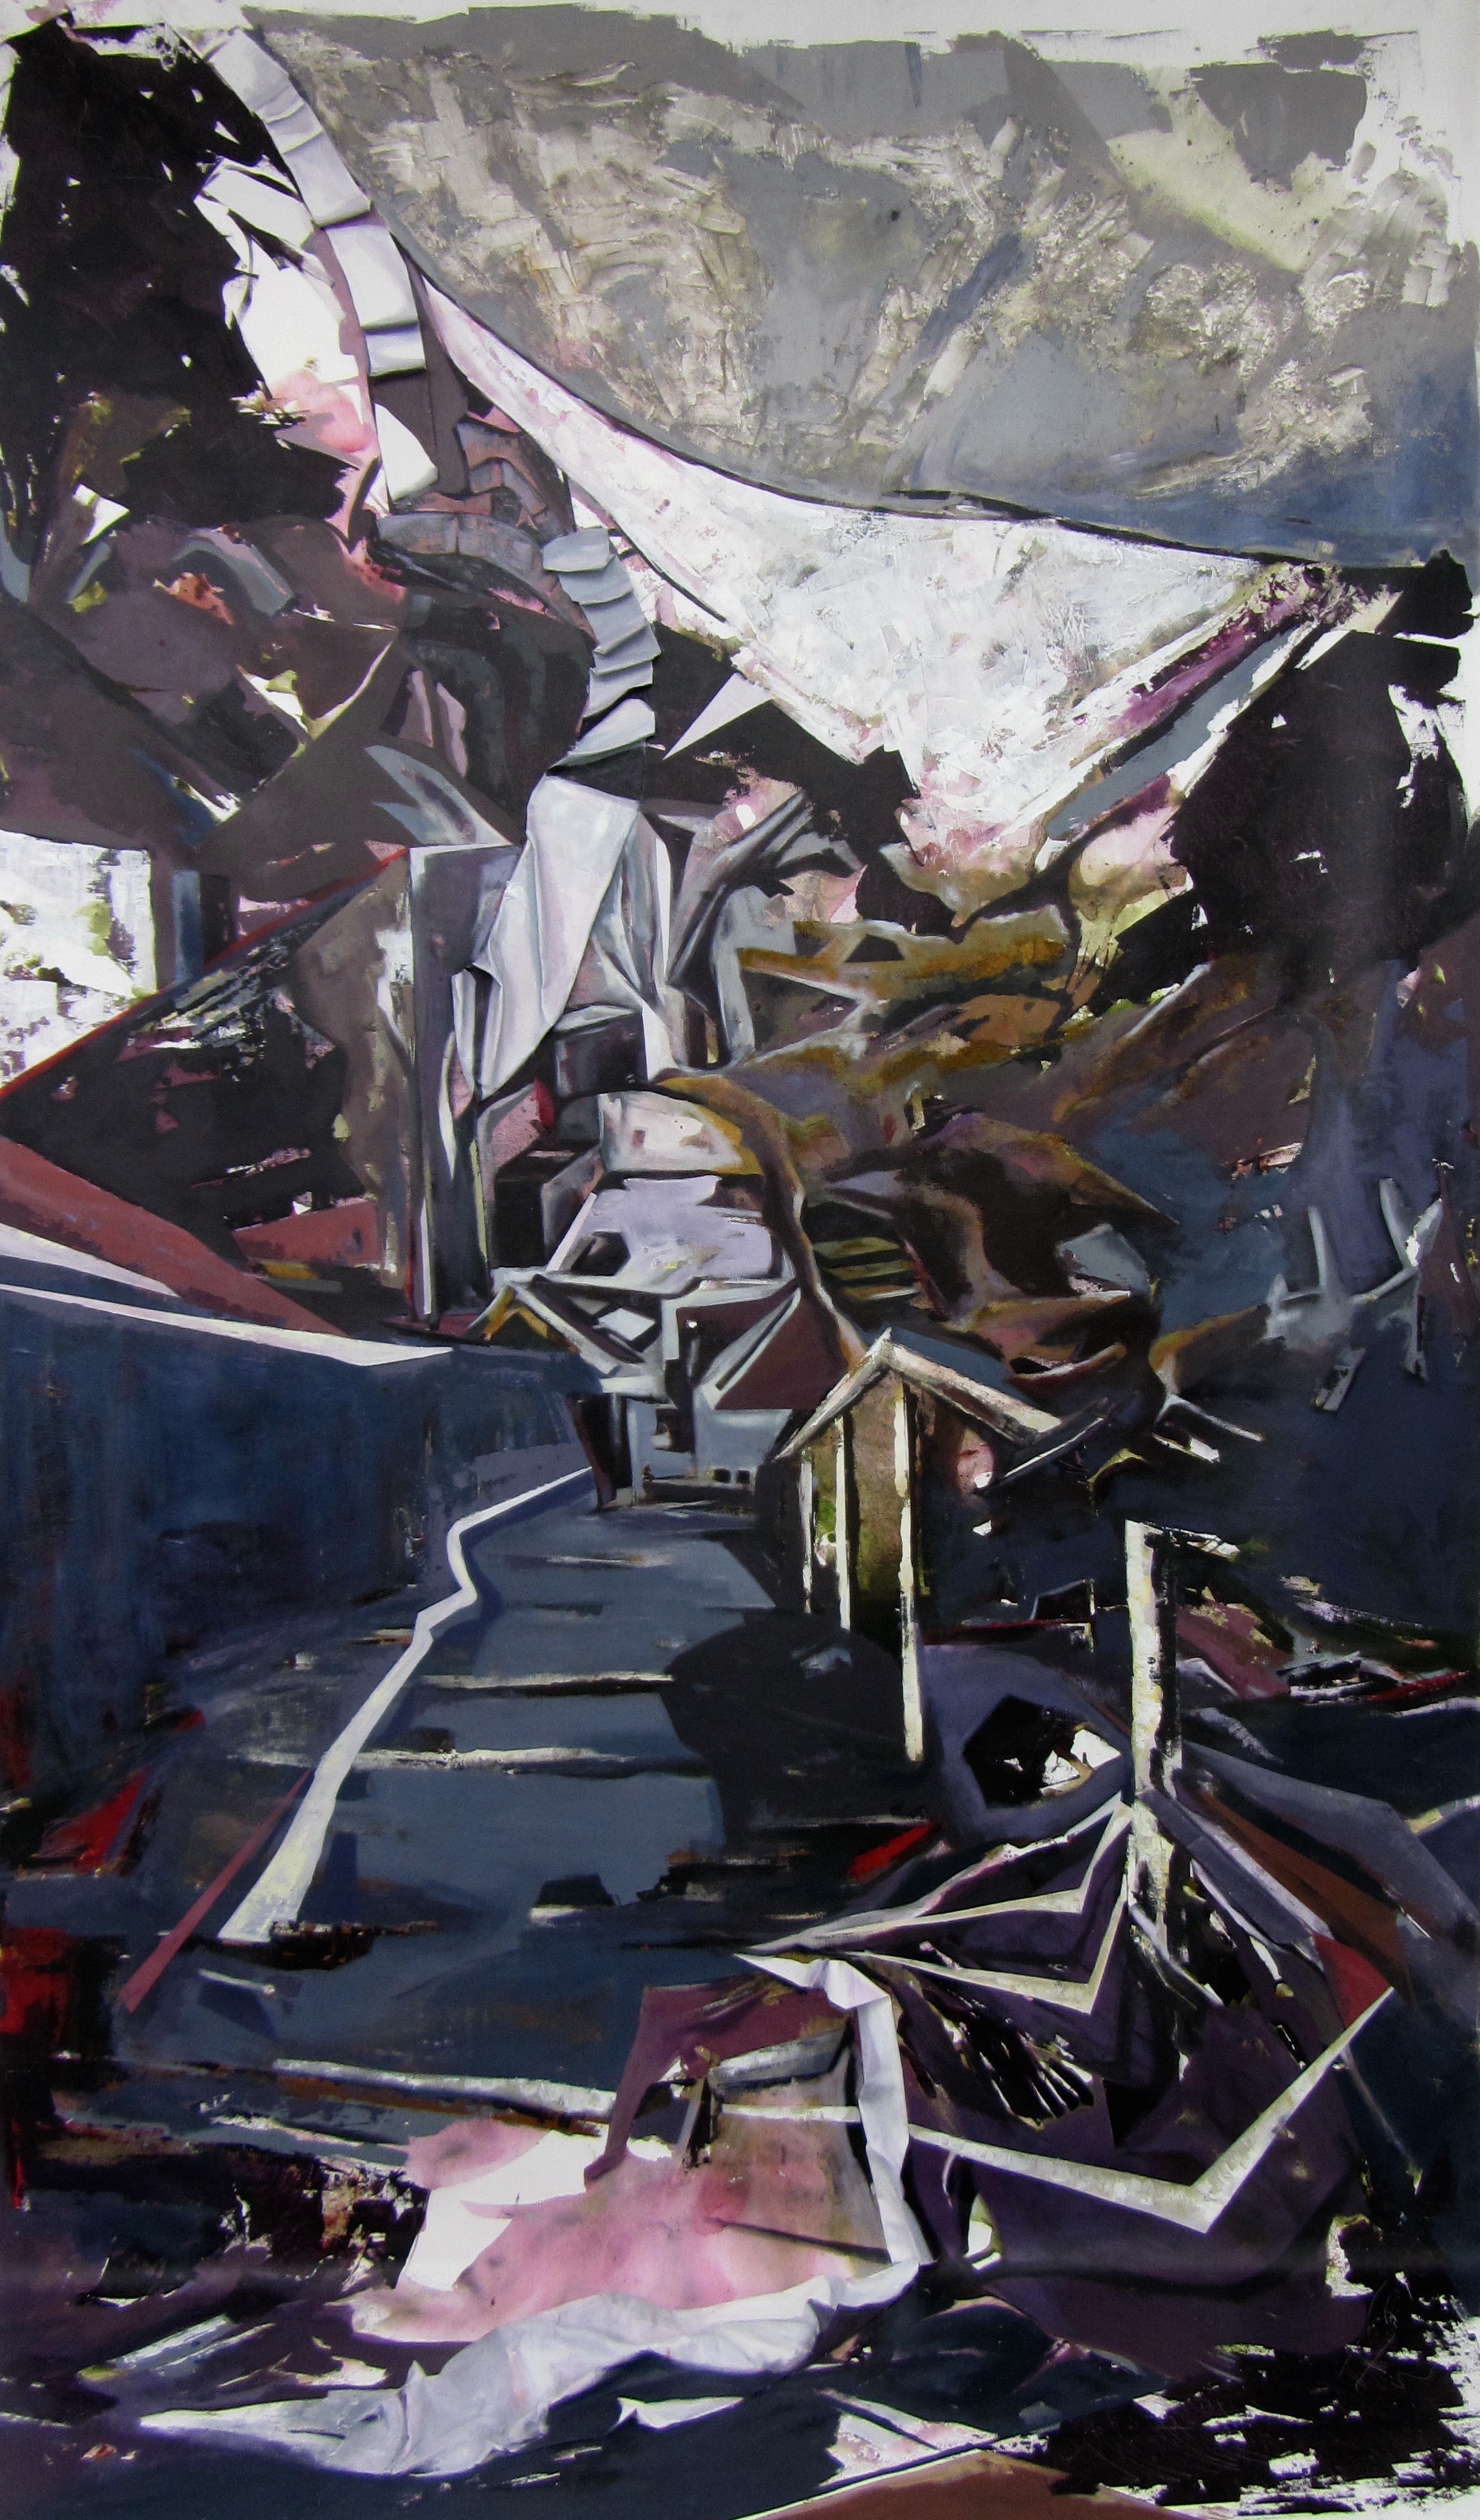 Landscape #14, acrylic on canvas, 190x83 inches, 2013